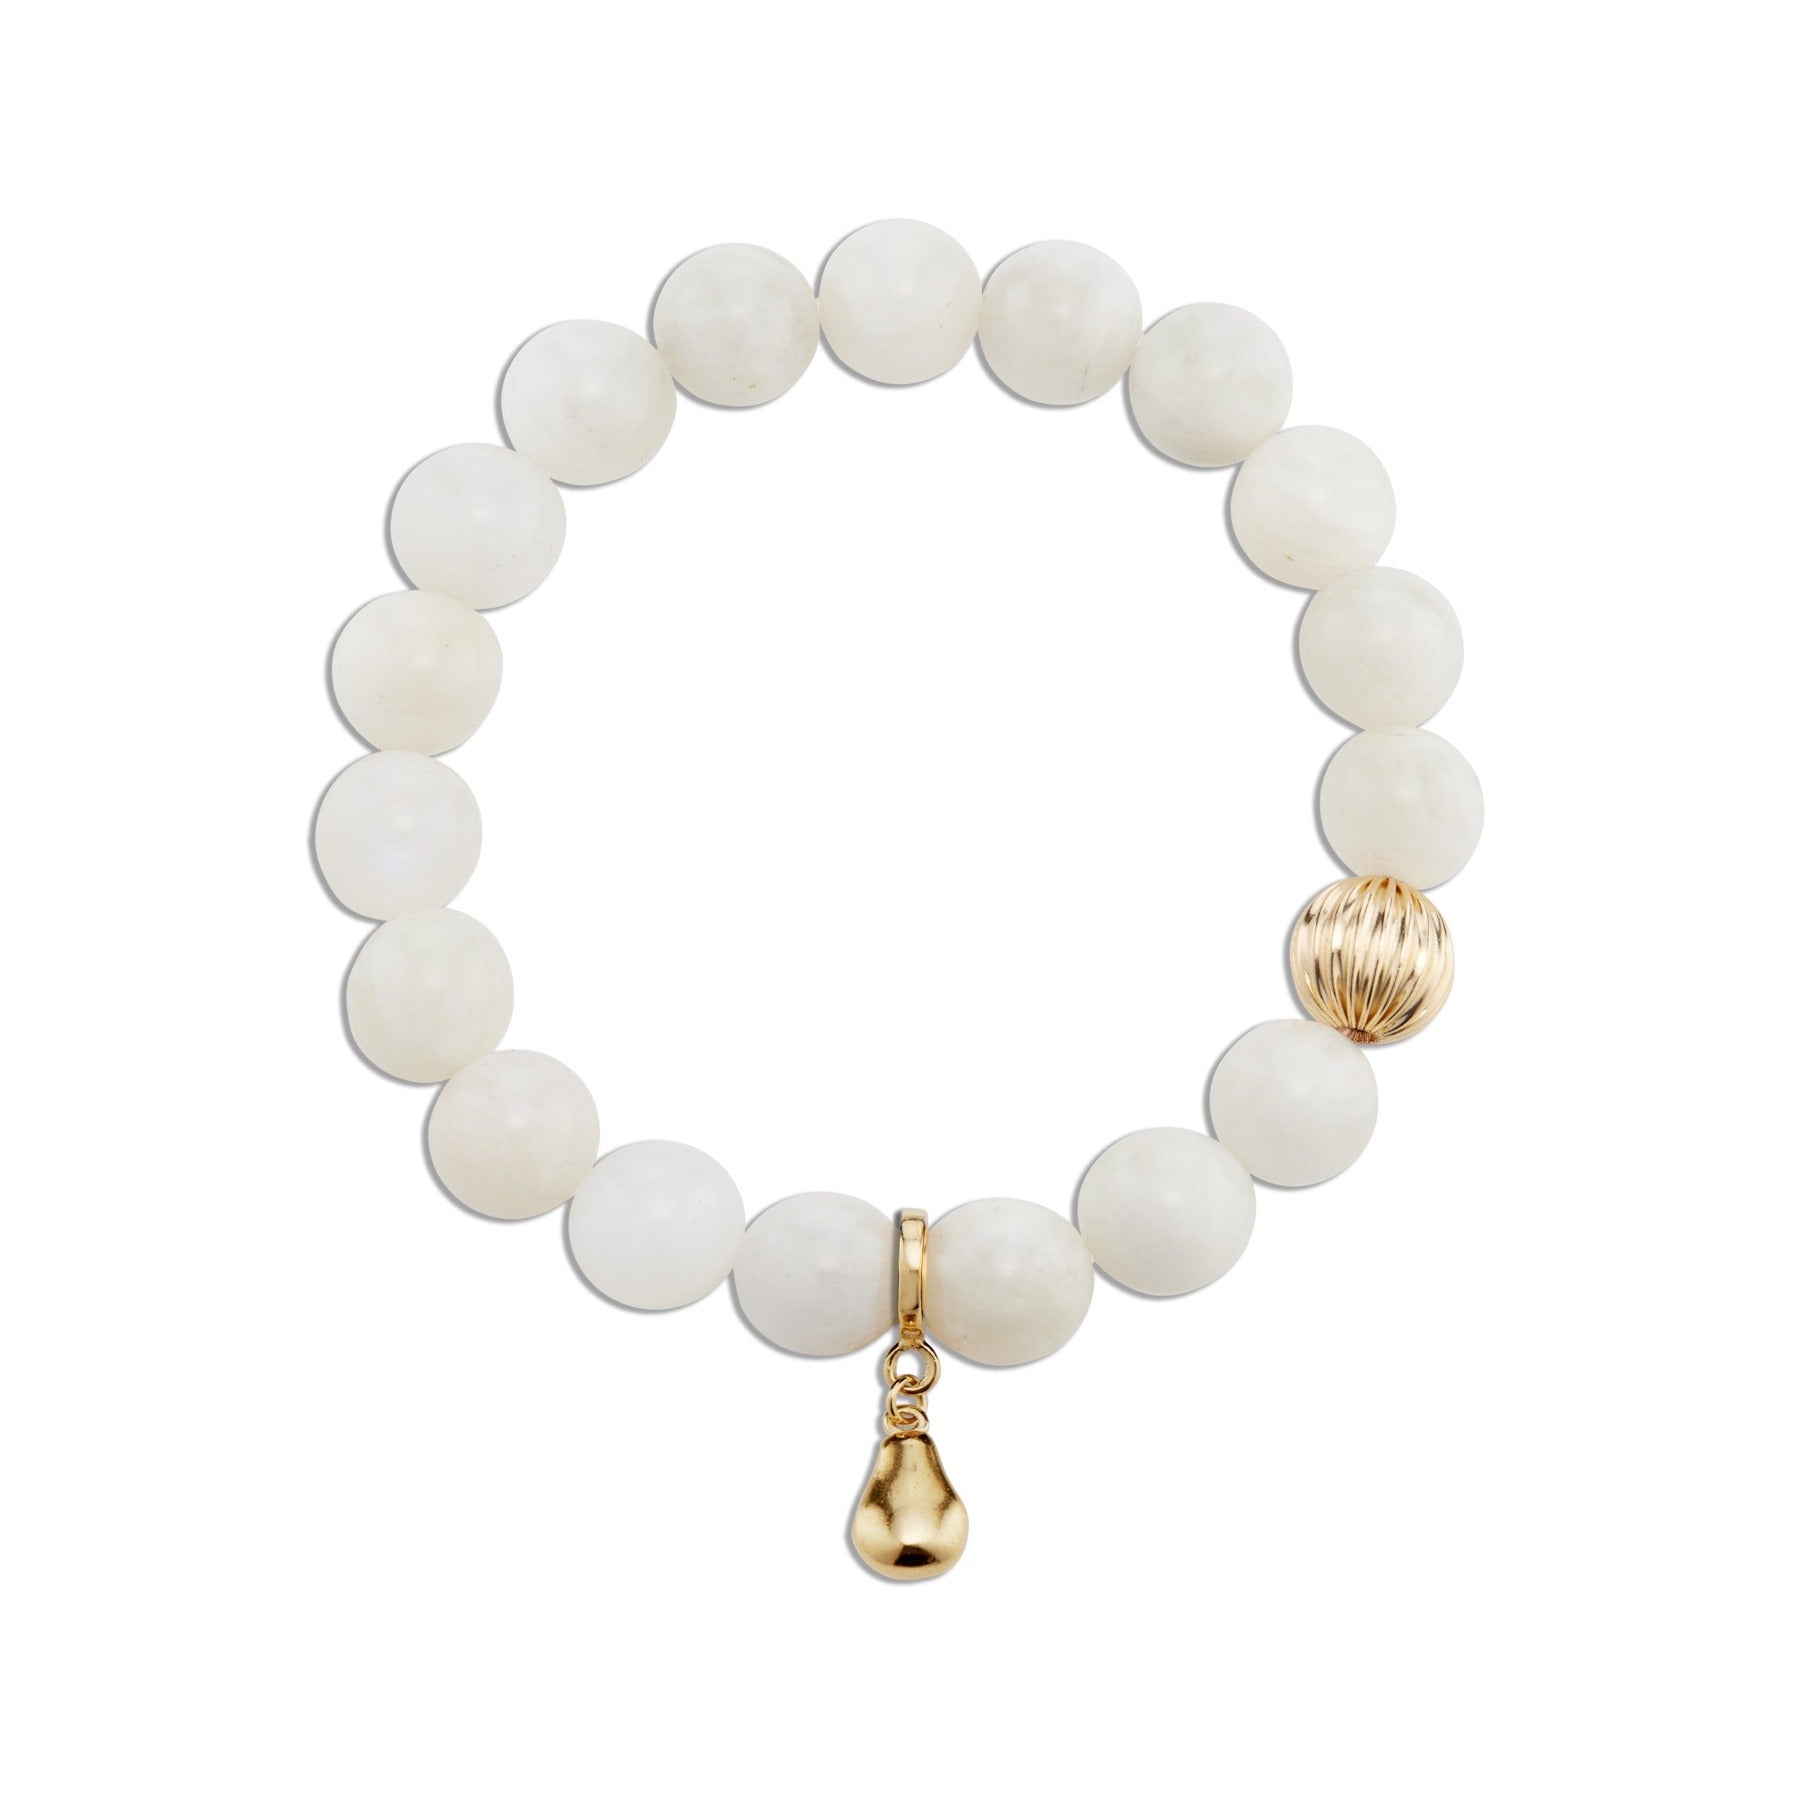 White moonstone smooth crystal gemstone elastic bracelet with 14k gold filled textured bead and pear charm.